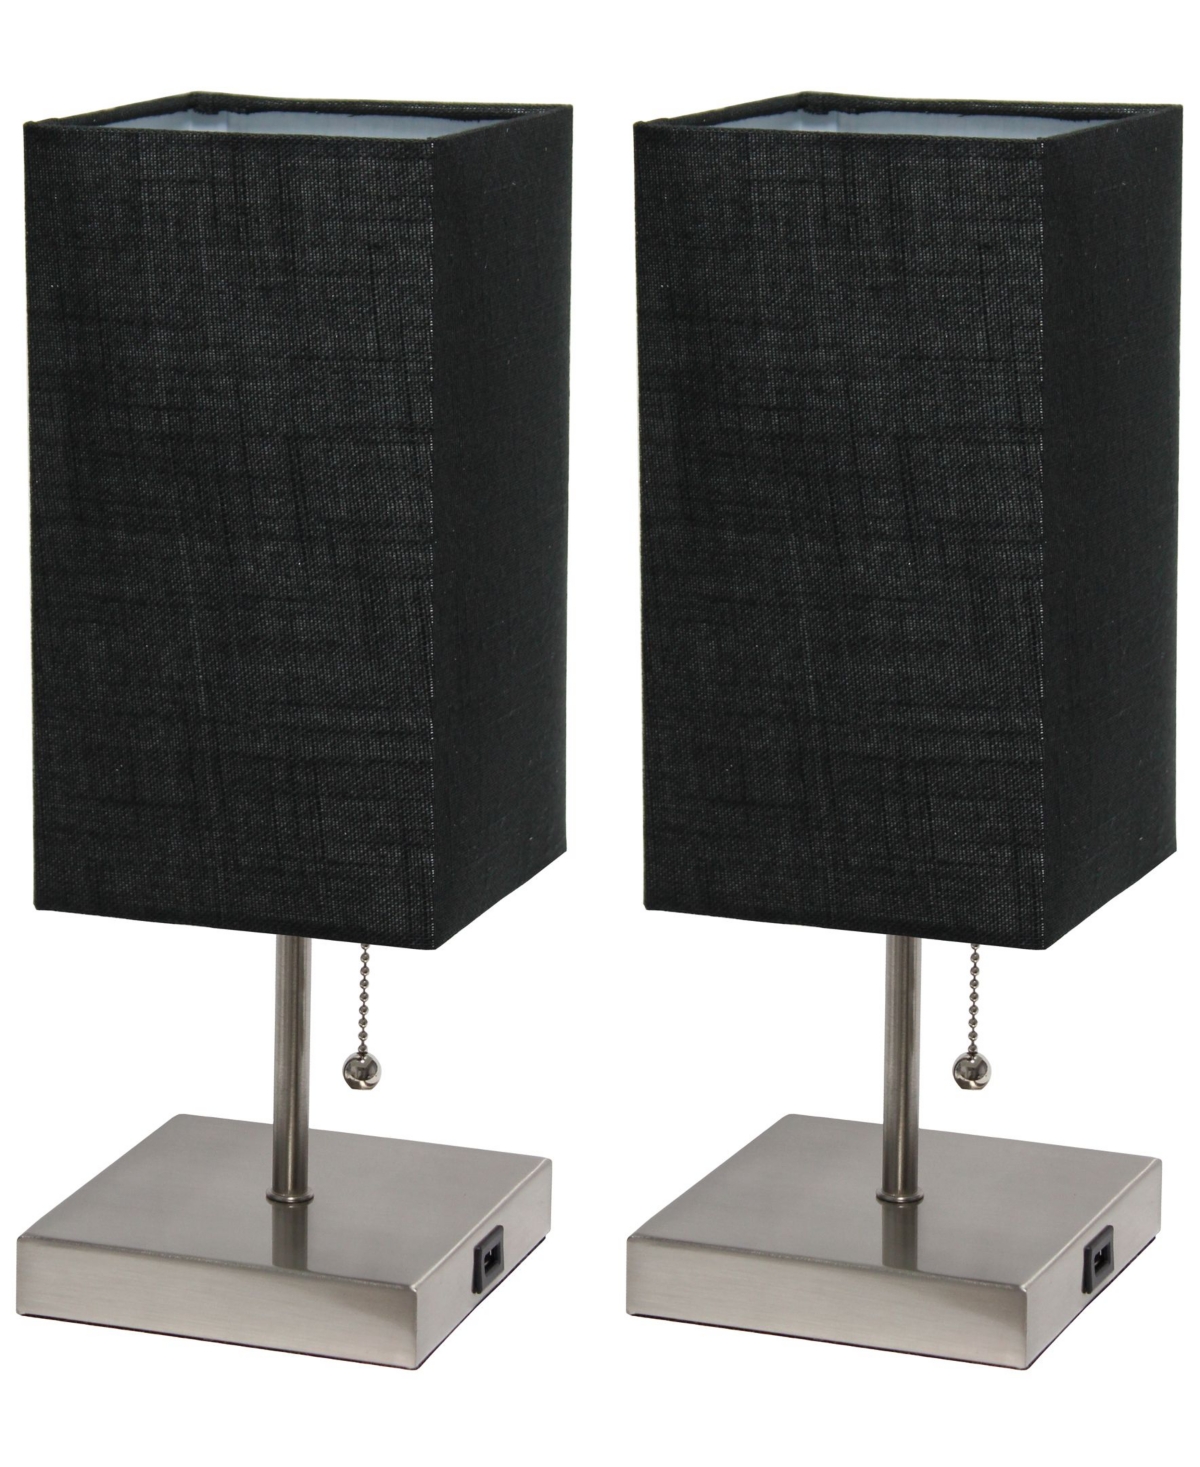 Simple Designs Petite Stick Lamp With Usb Charging Port, Set Of 2 In Black Shade,brushed Nickel Base